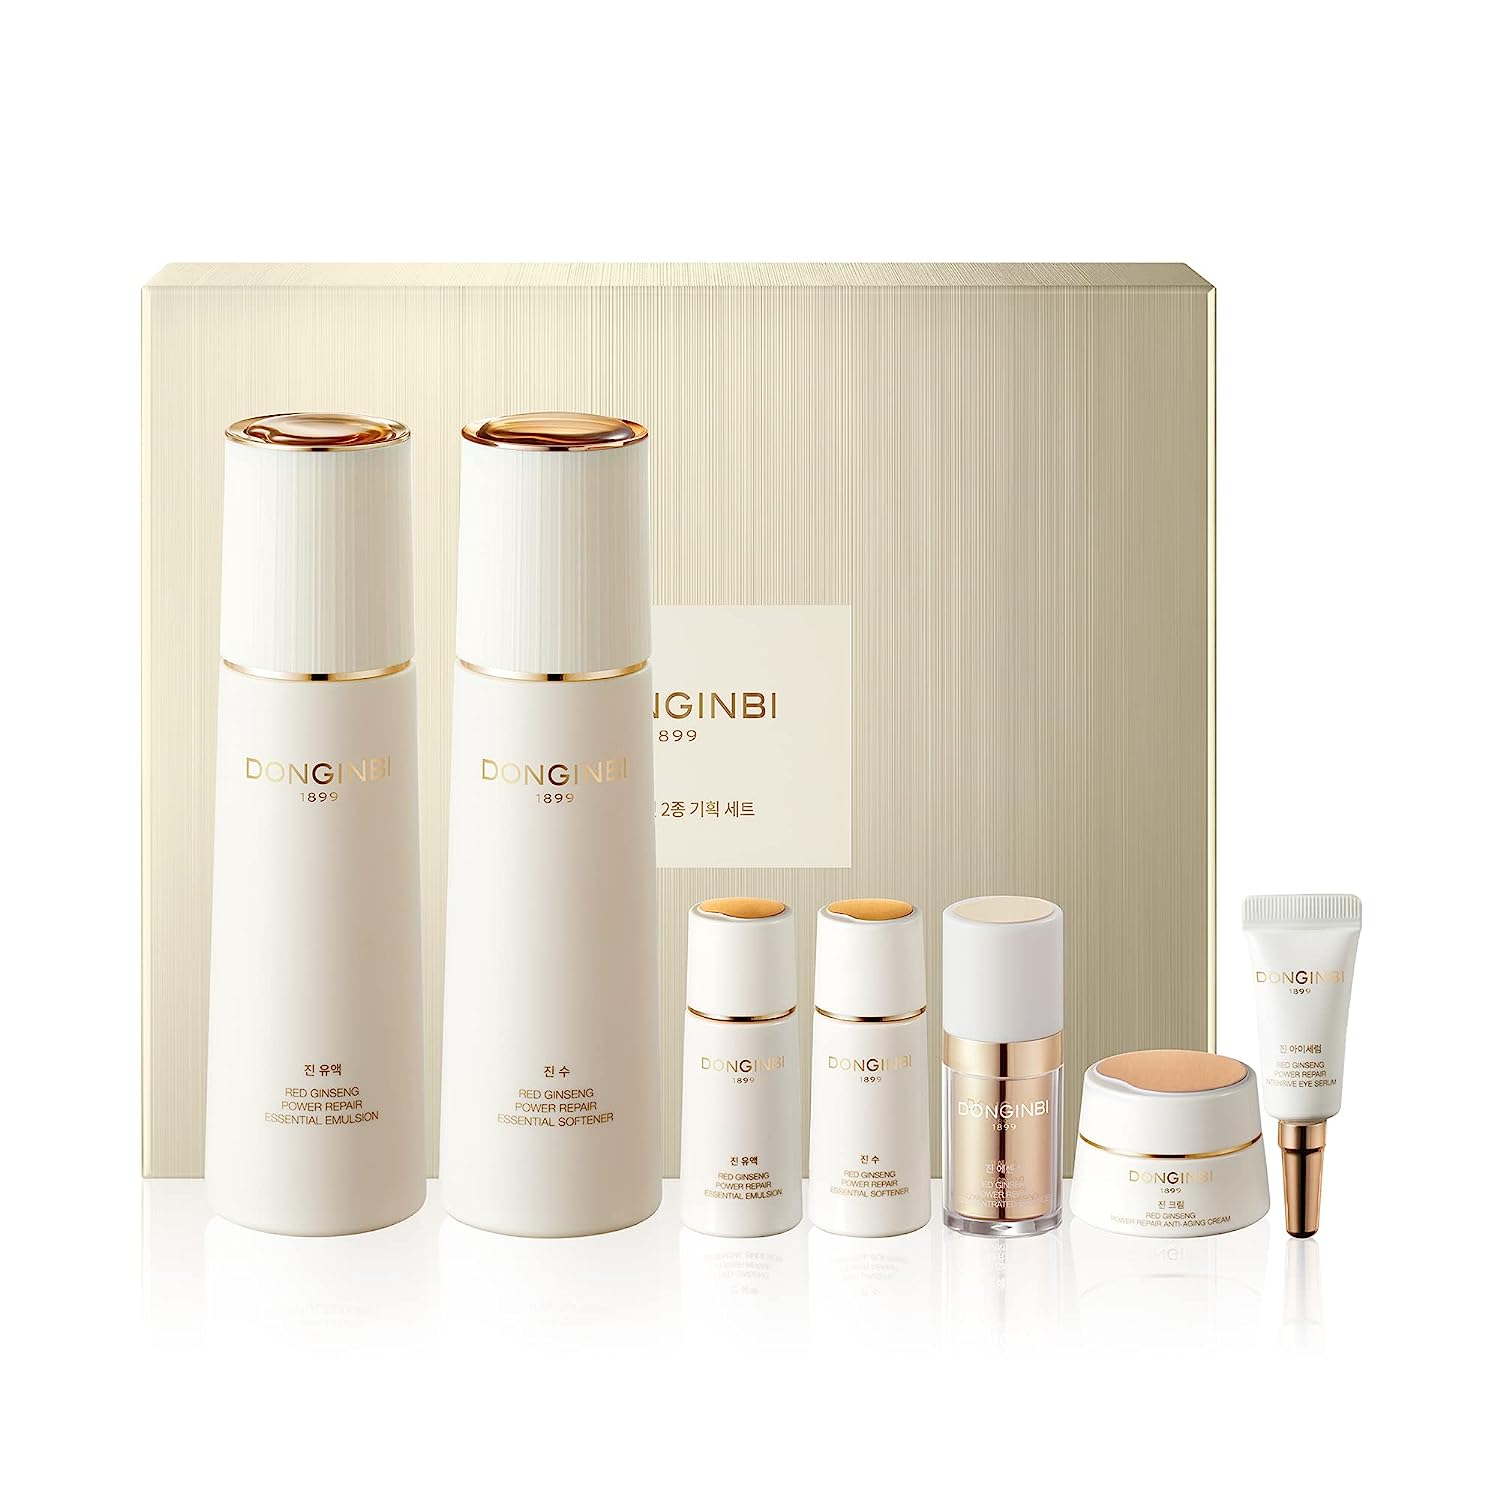 DONGINBI Power Repair Skincare Products from beyondbeautyevents.com